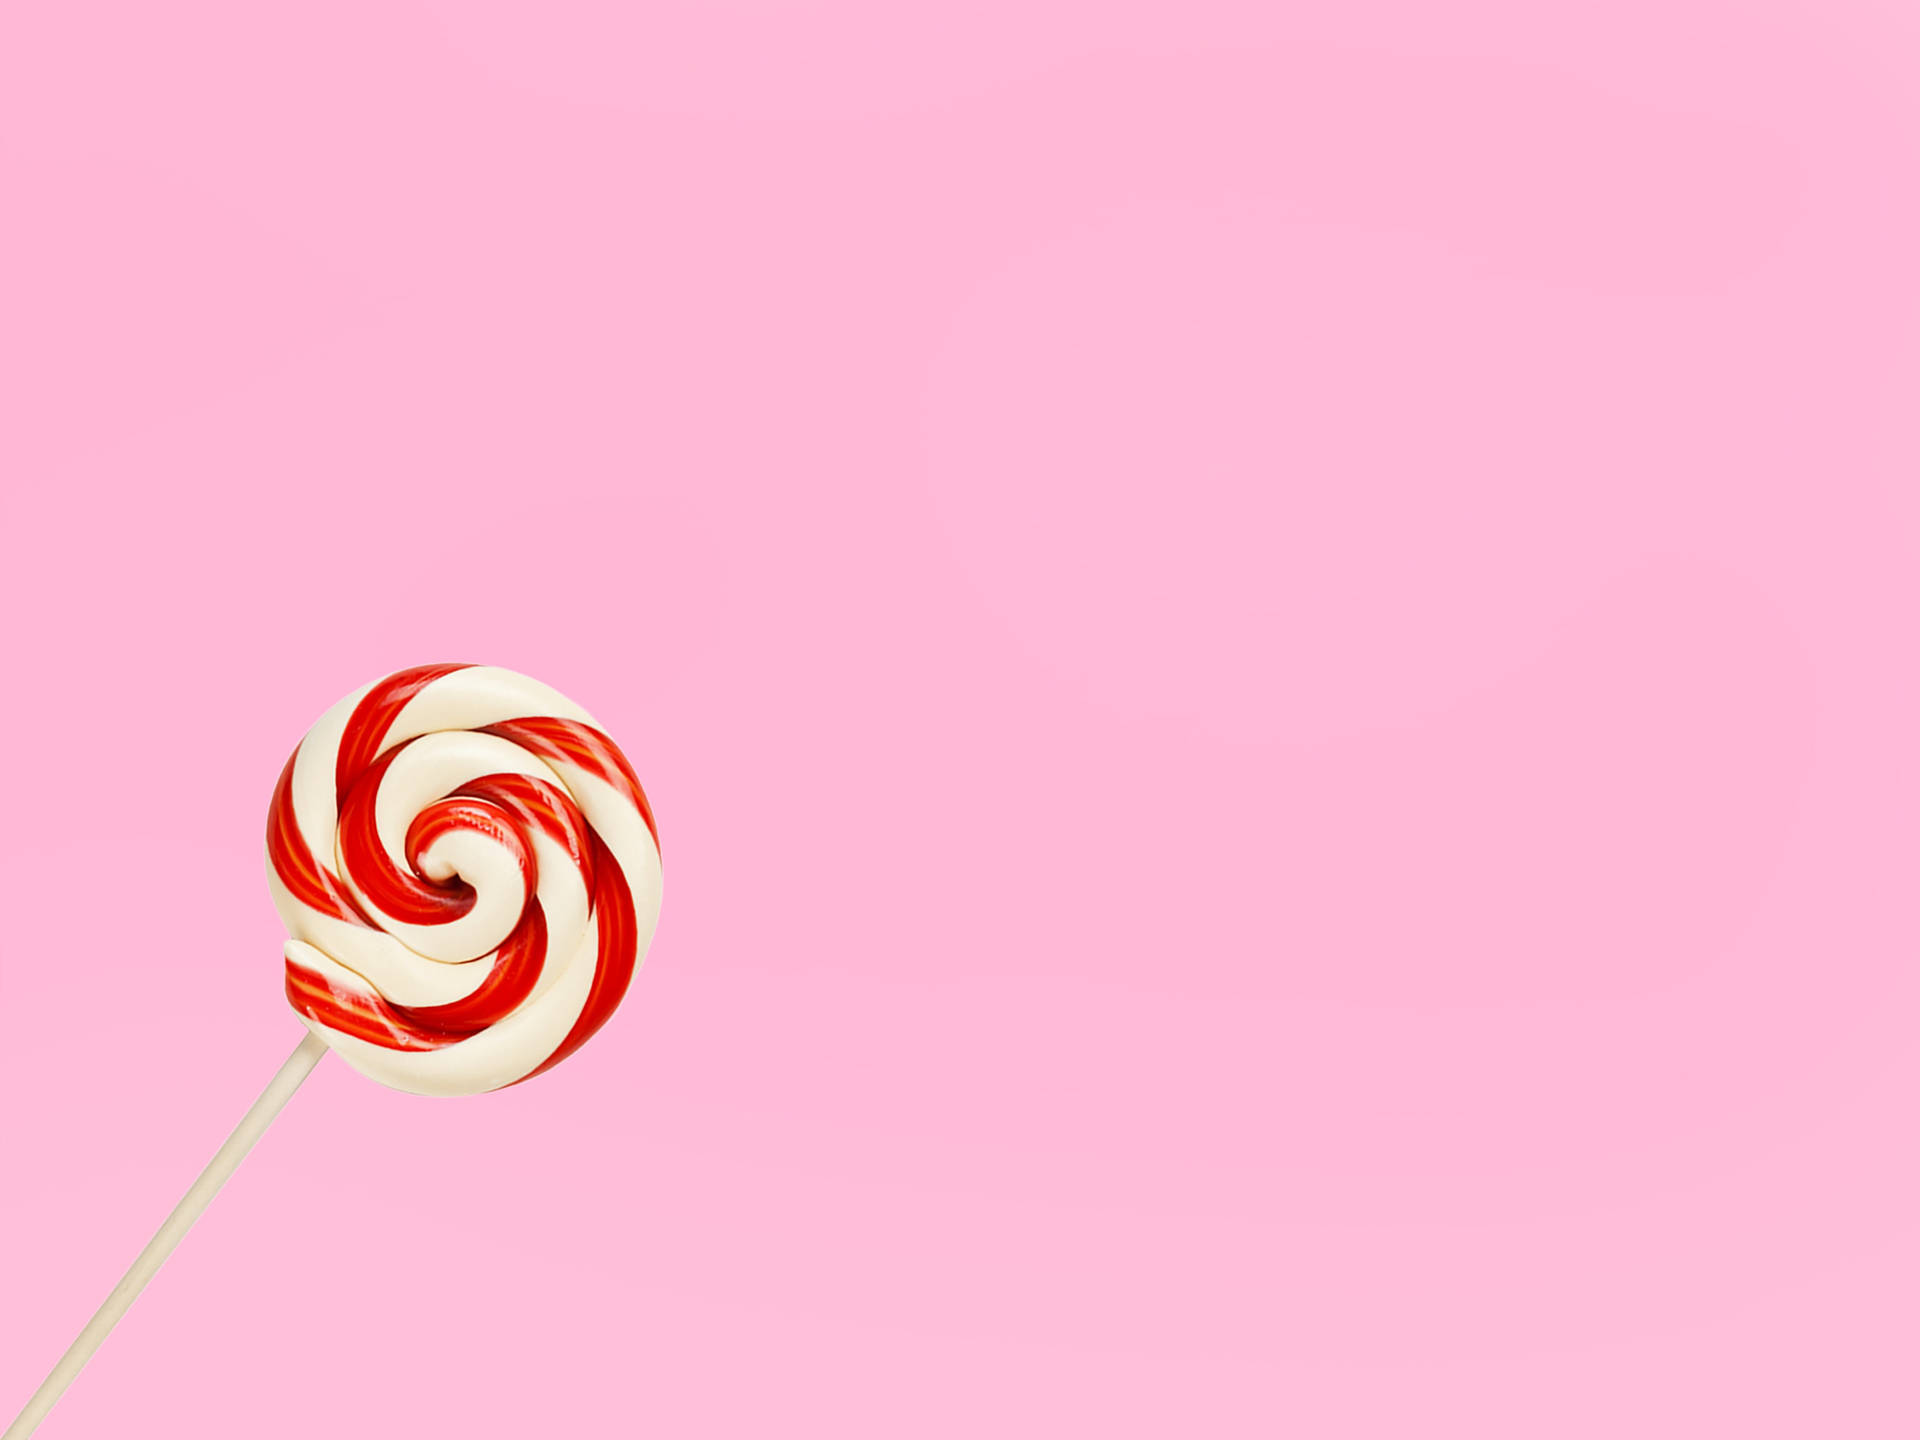 Cute Pastel Aesthetic Pink Swirl Candy Background